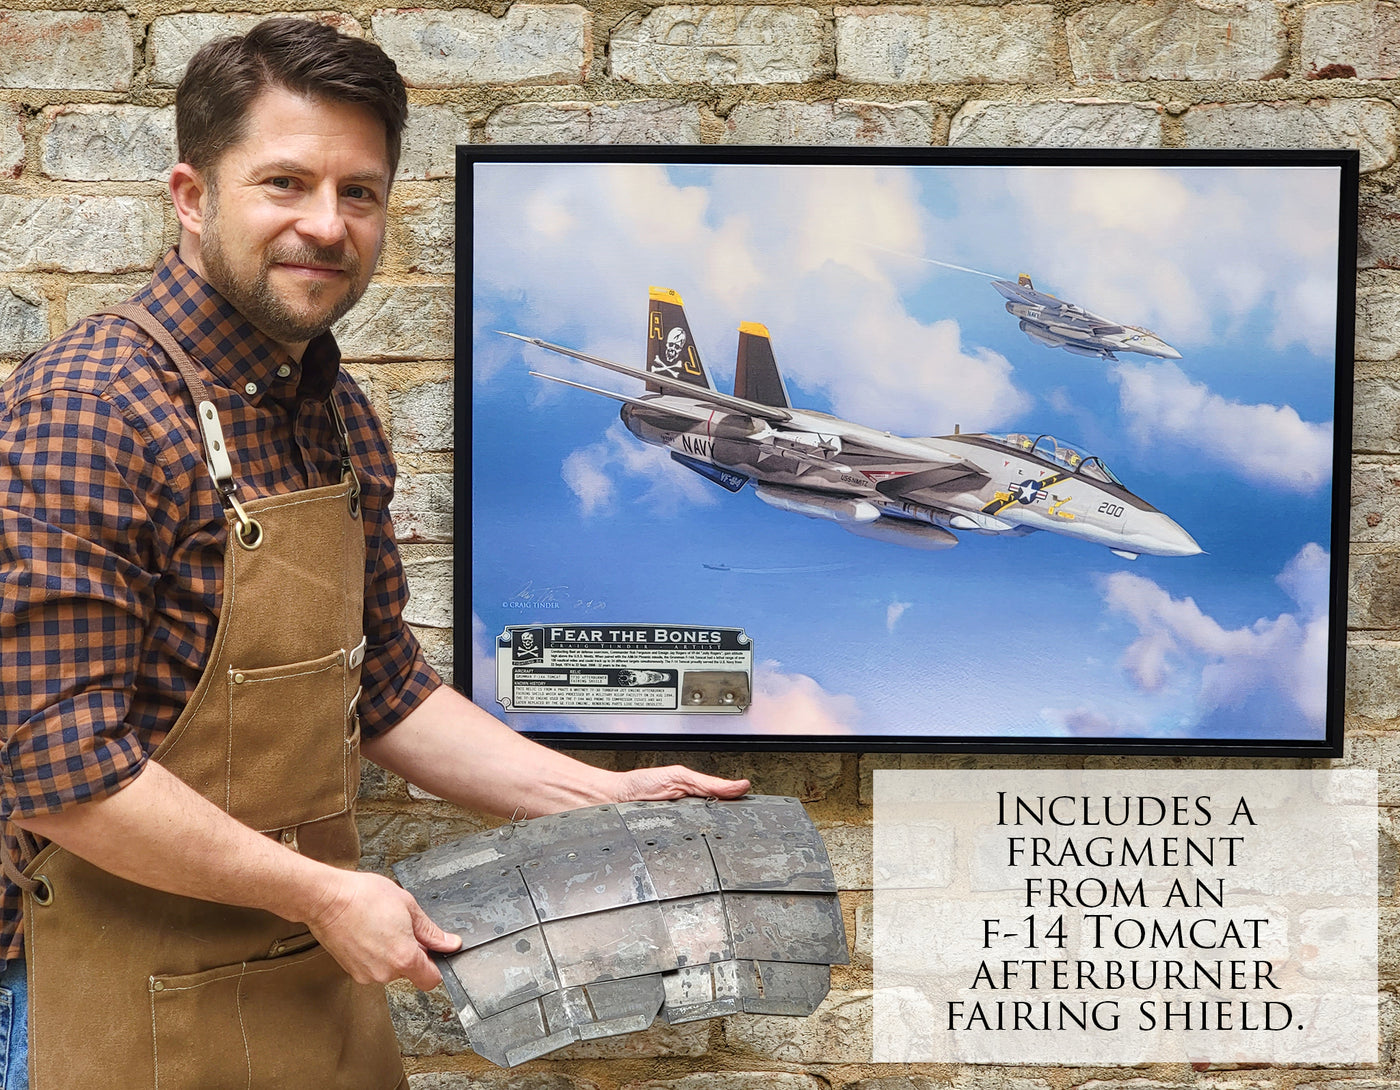 Fear the Bones - F-14A Tomcat Aviation Art-Art Print-Aces In Action: The Workshop of Artist Craig Tinder